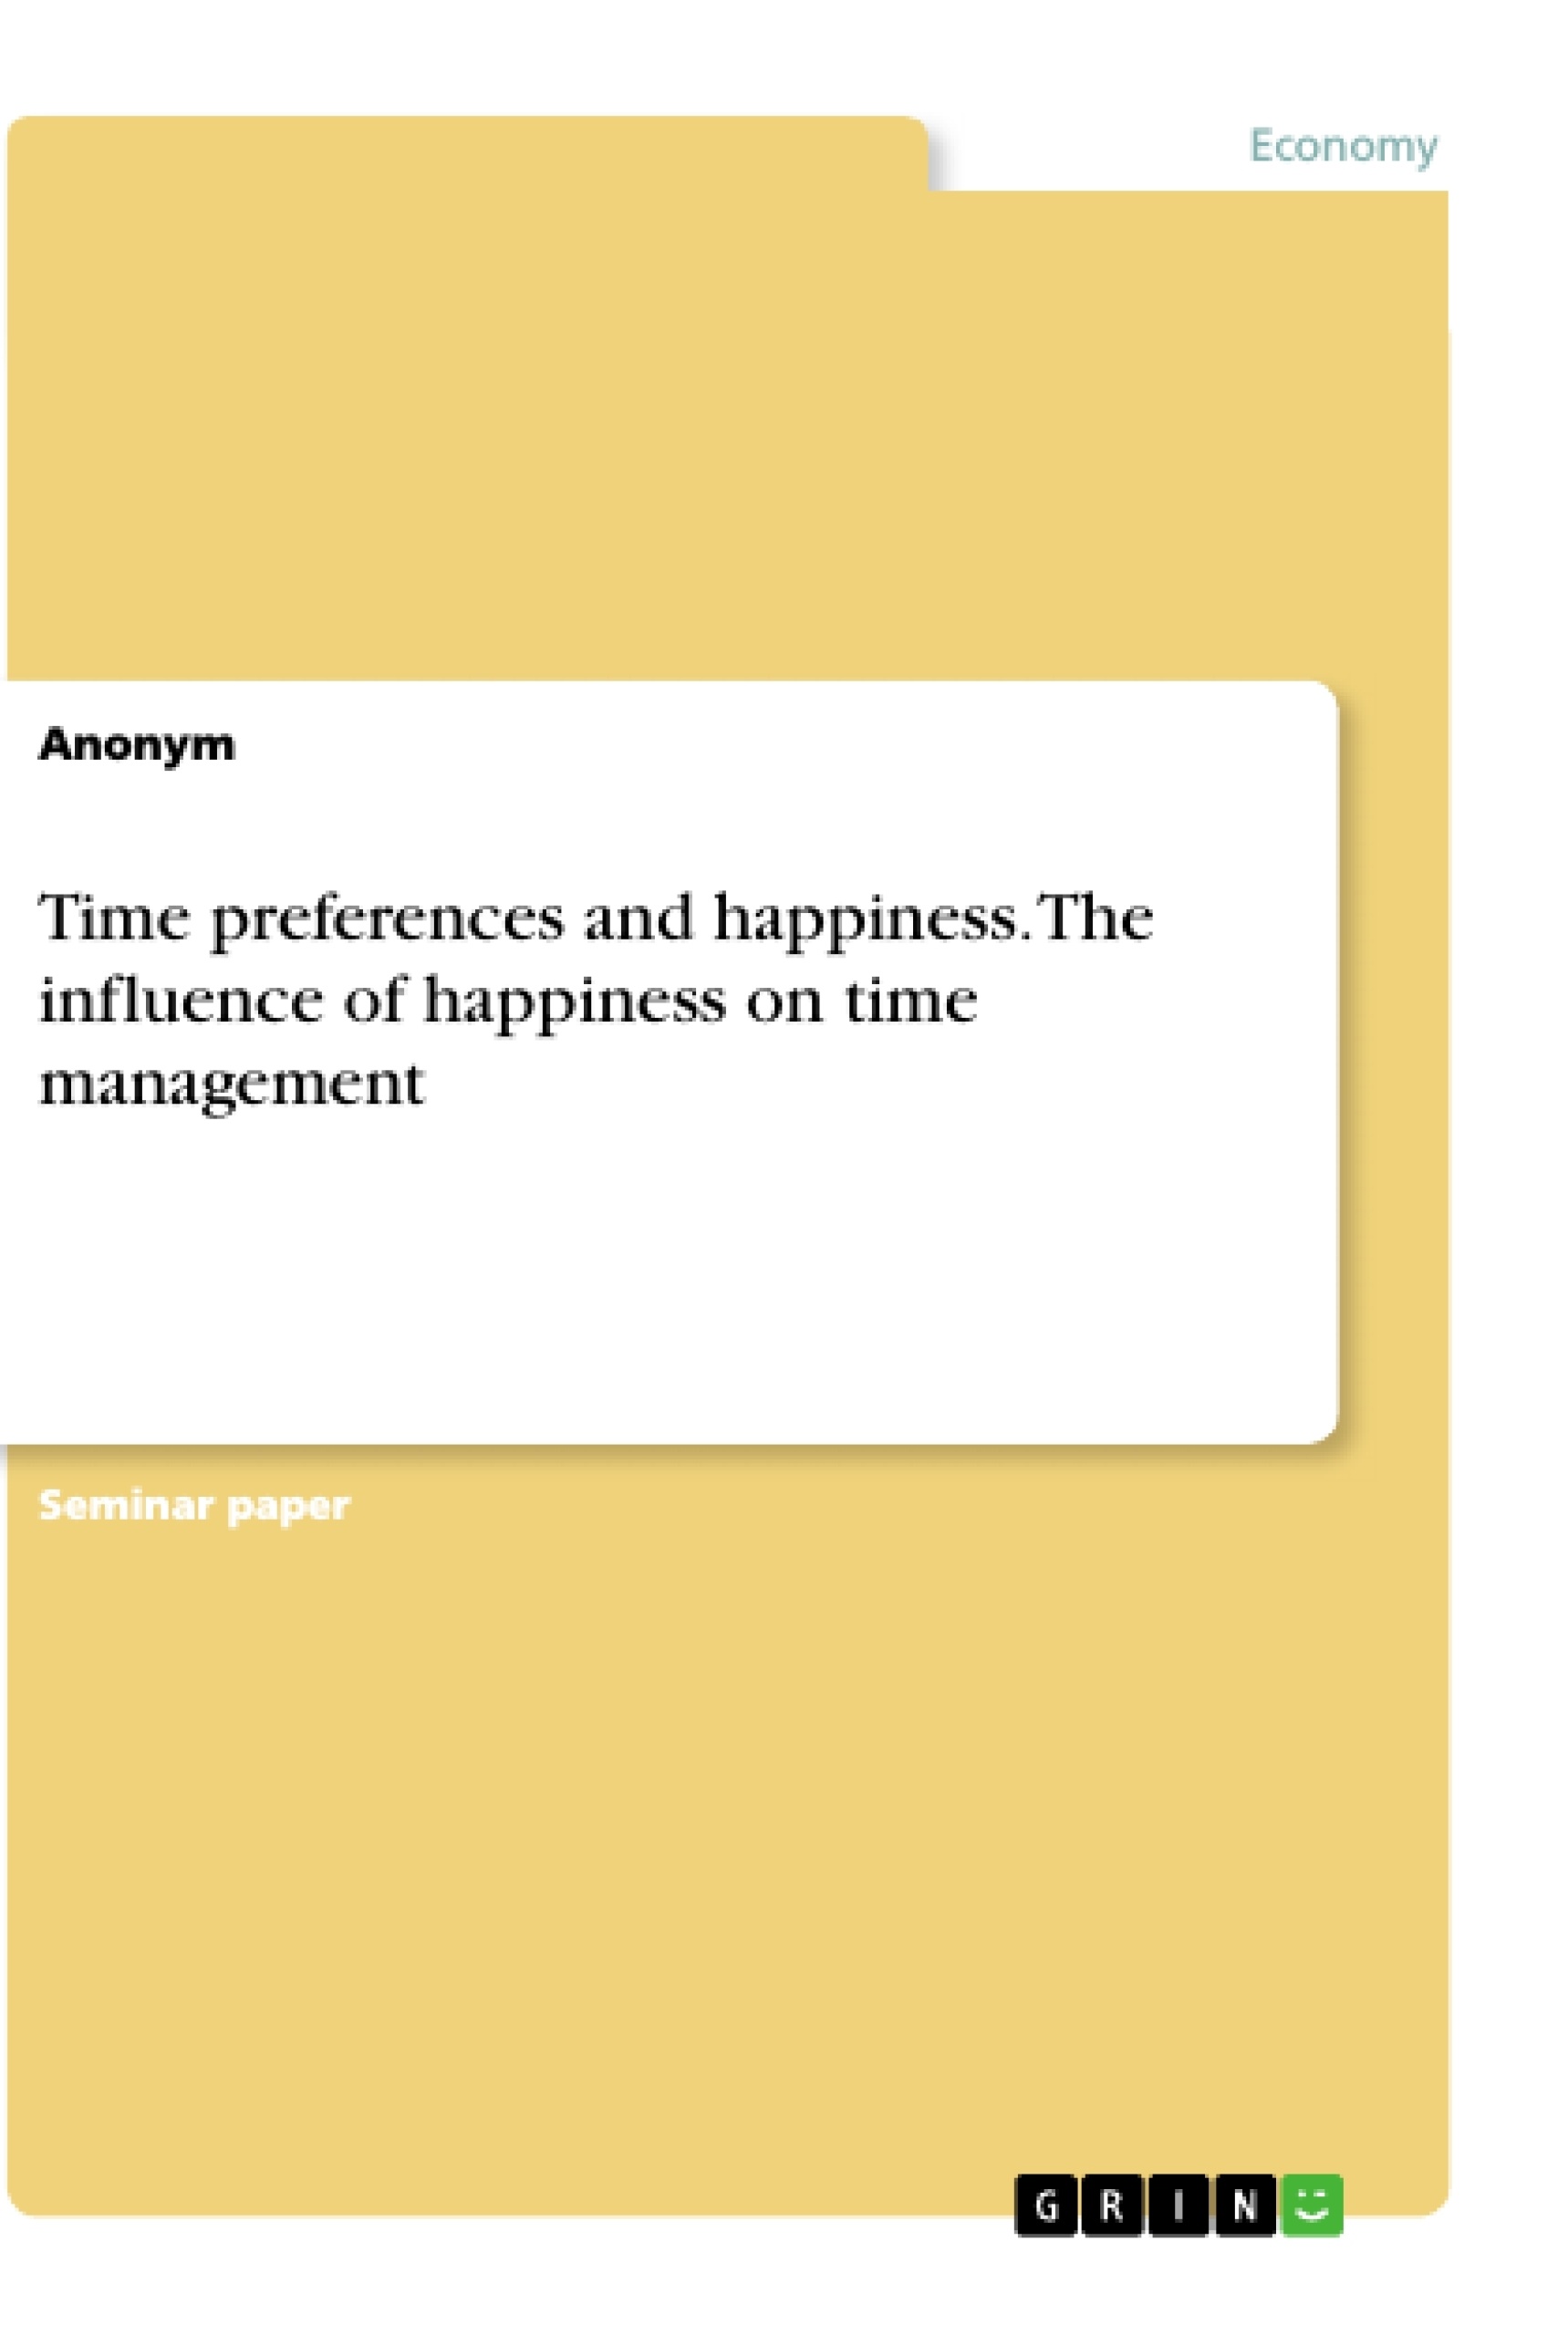 Title: Time preferences and happiness. The influence of happiness on time management